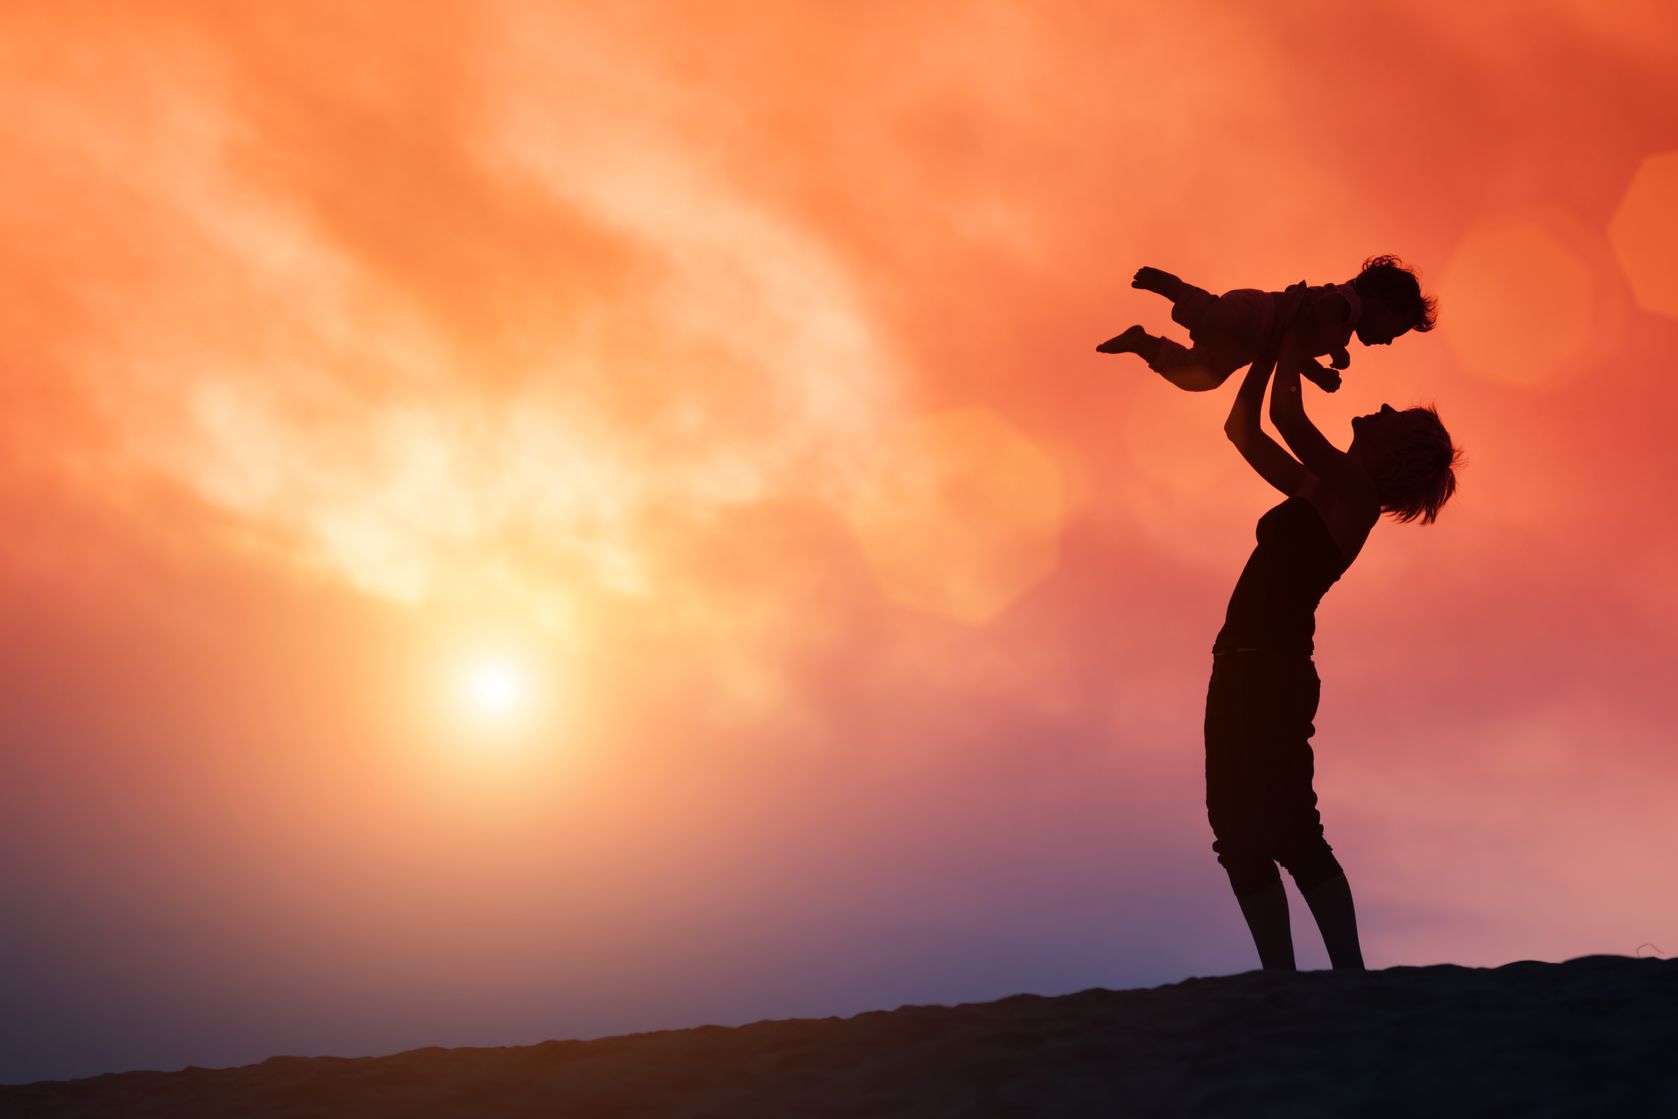 18709037 - mother lifting toddler child in air over scenic sunset sky